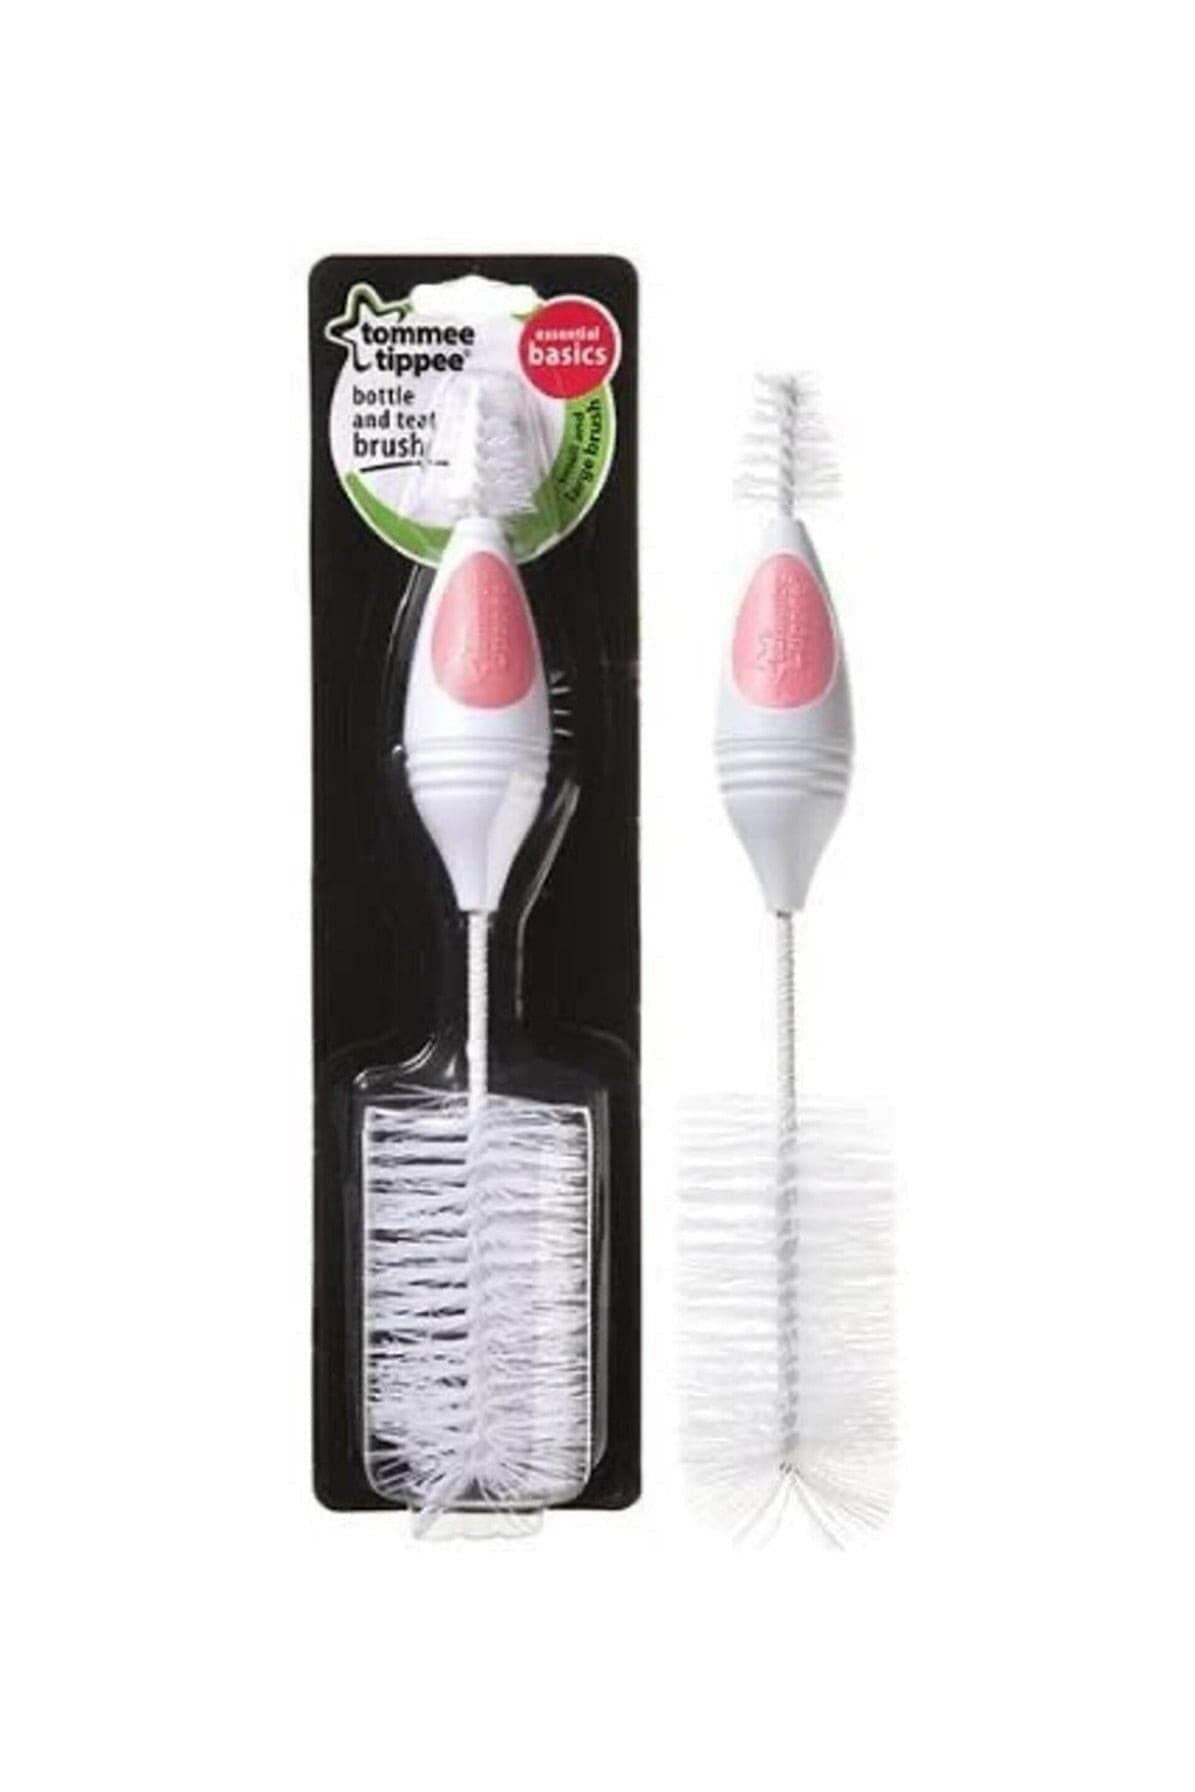 Tommee Tippee Essentials Bottle Brush and Teat Brush - Pink.